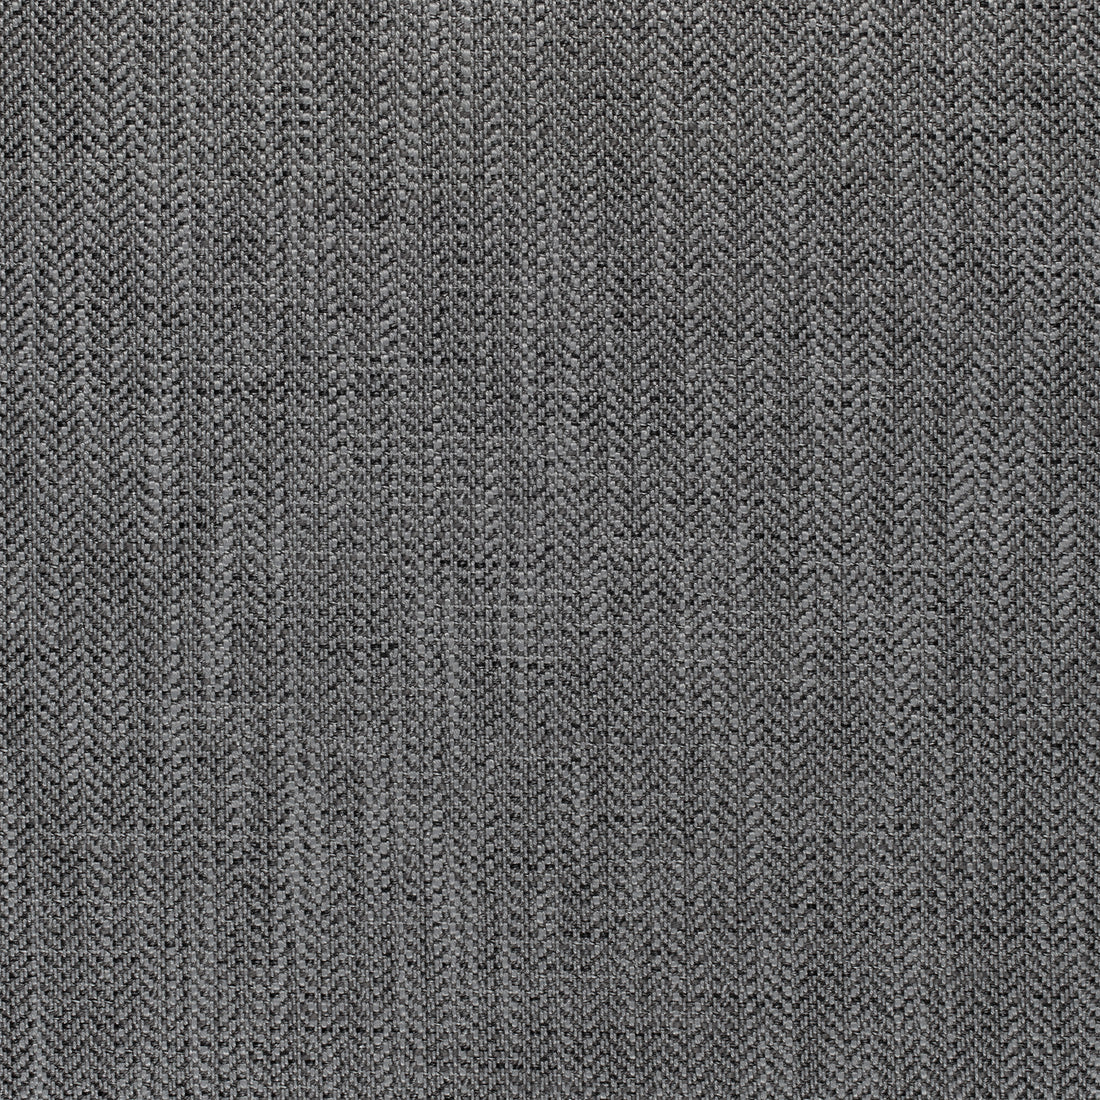 Ashbourne Tweed fabric in dark grey color - pattern number W80619 - by Thibaut in the Pinnacle collection